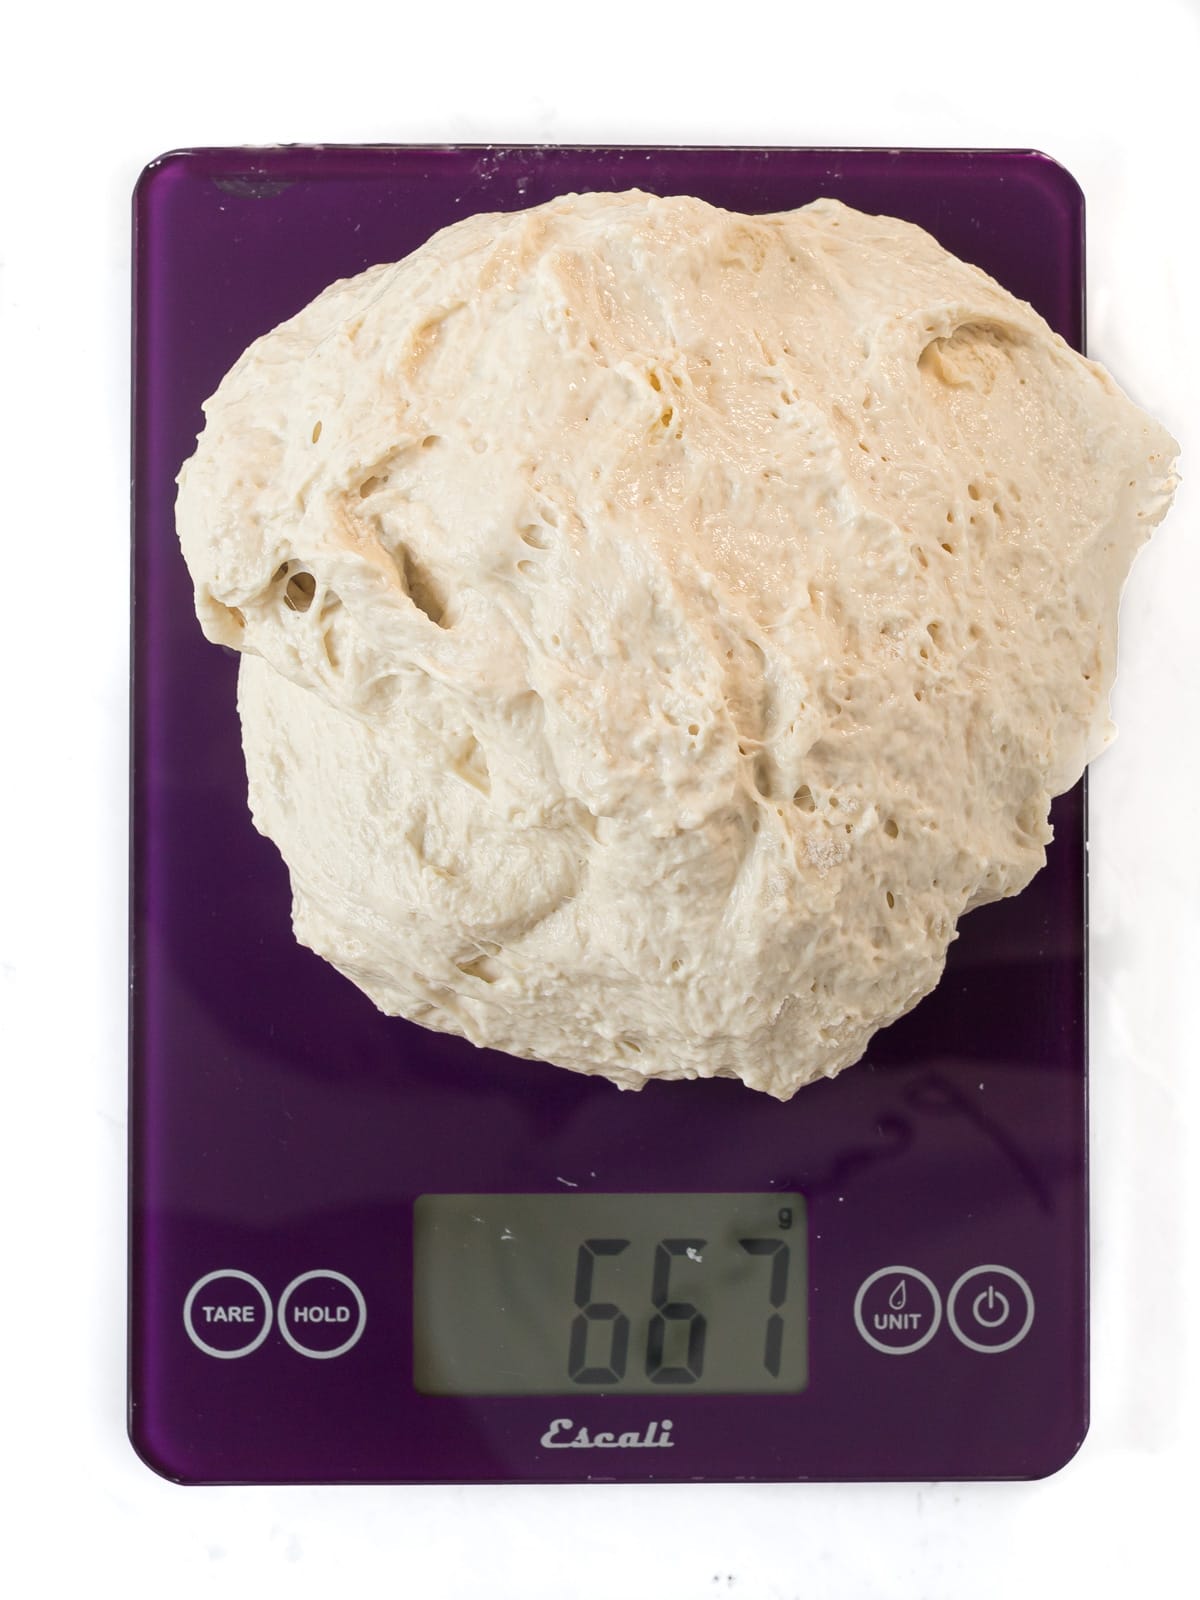 Large piece of dough on kitchen scale.